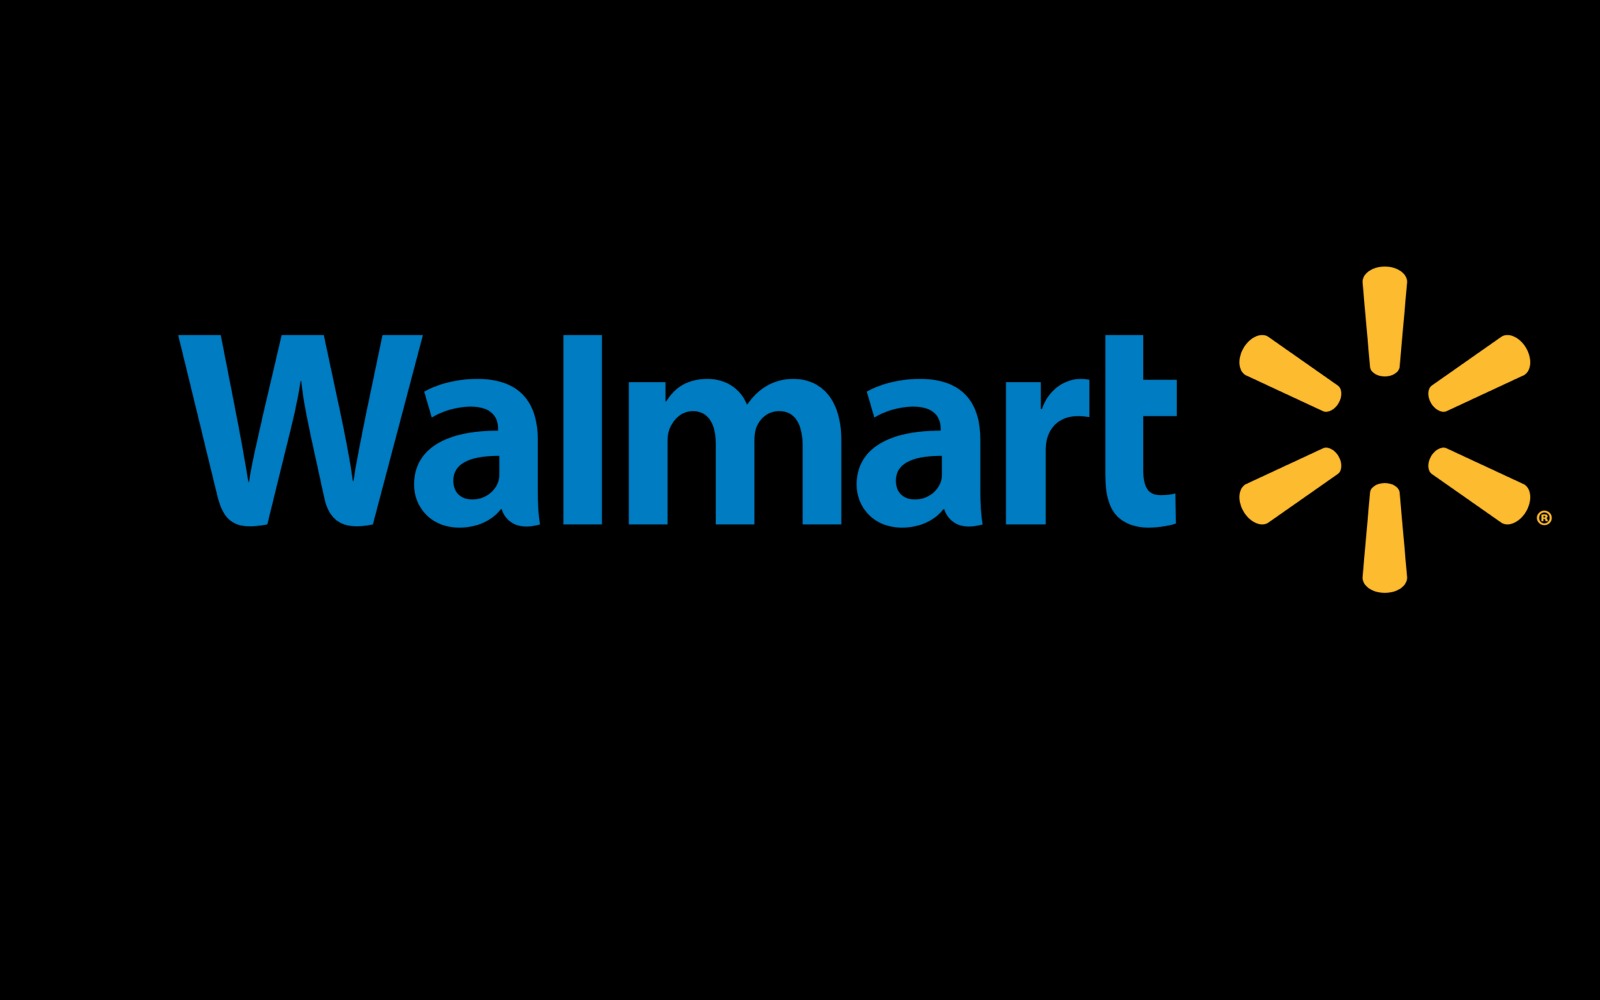 walmart text with yellow symbol on black background #476